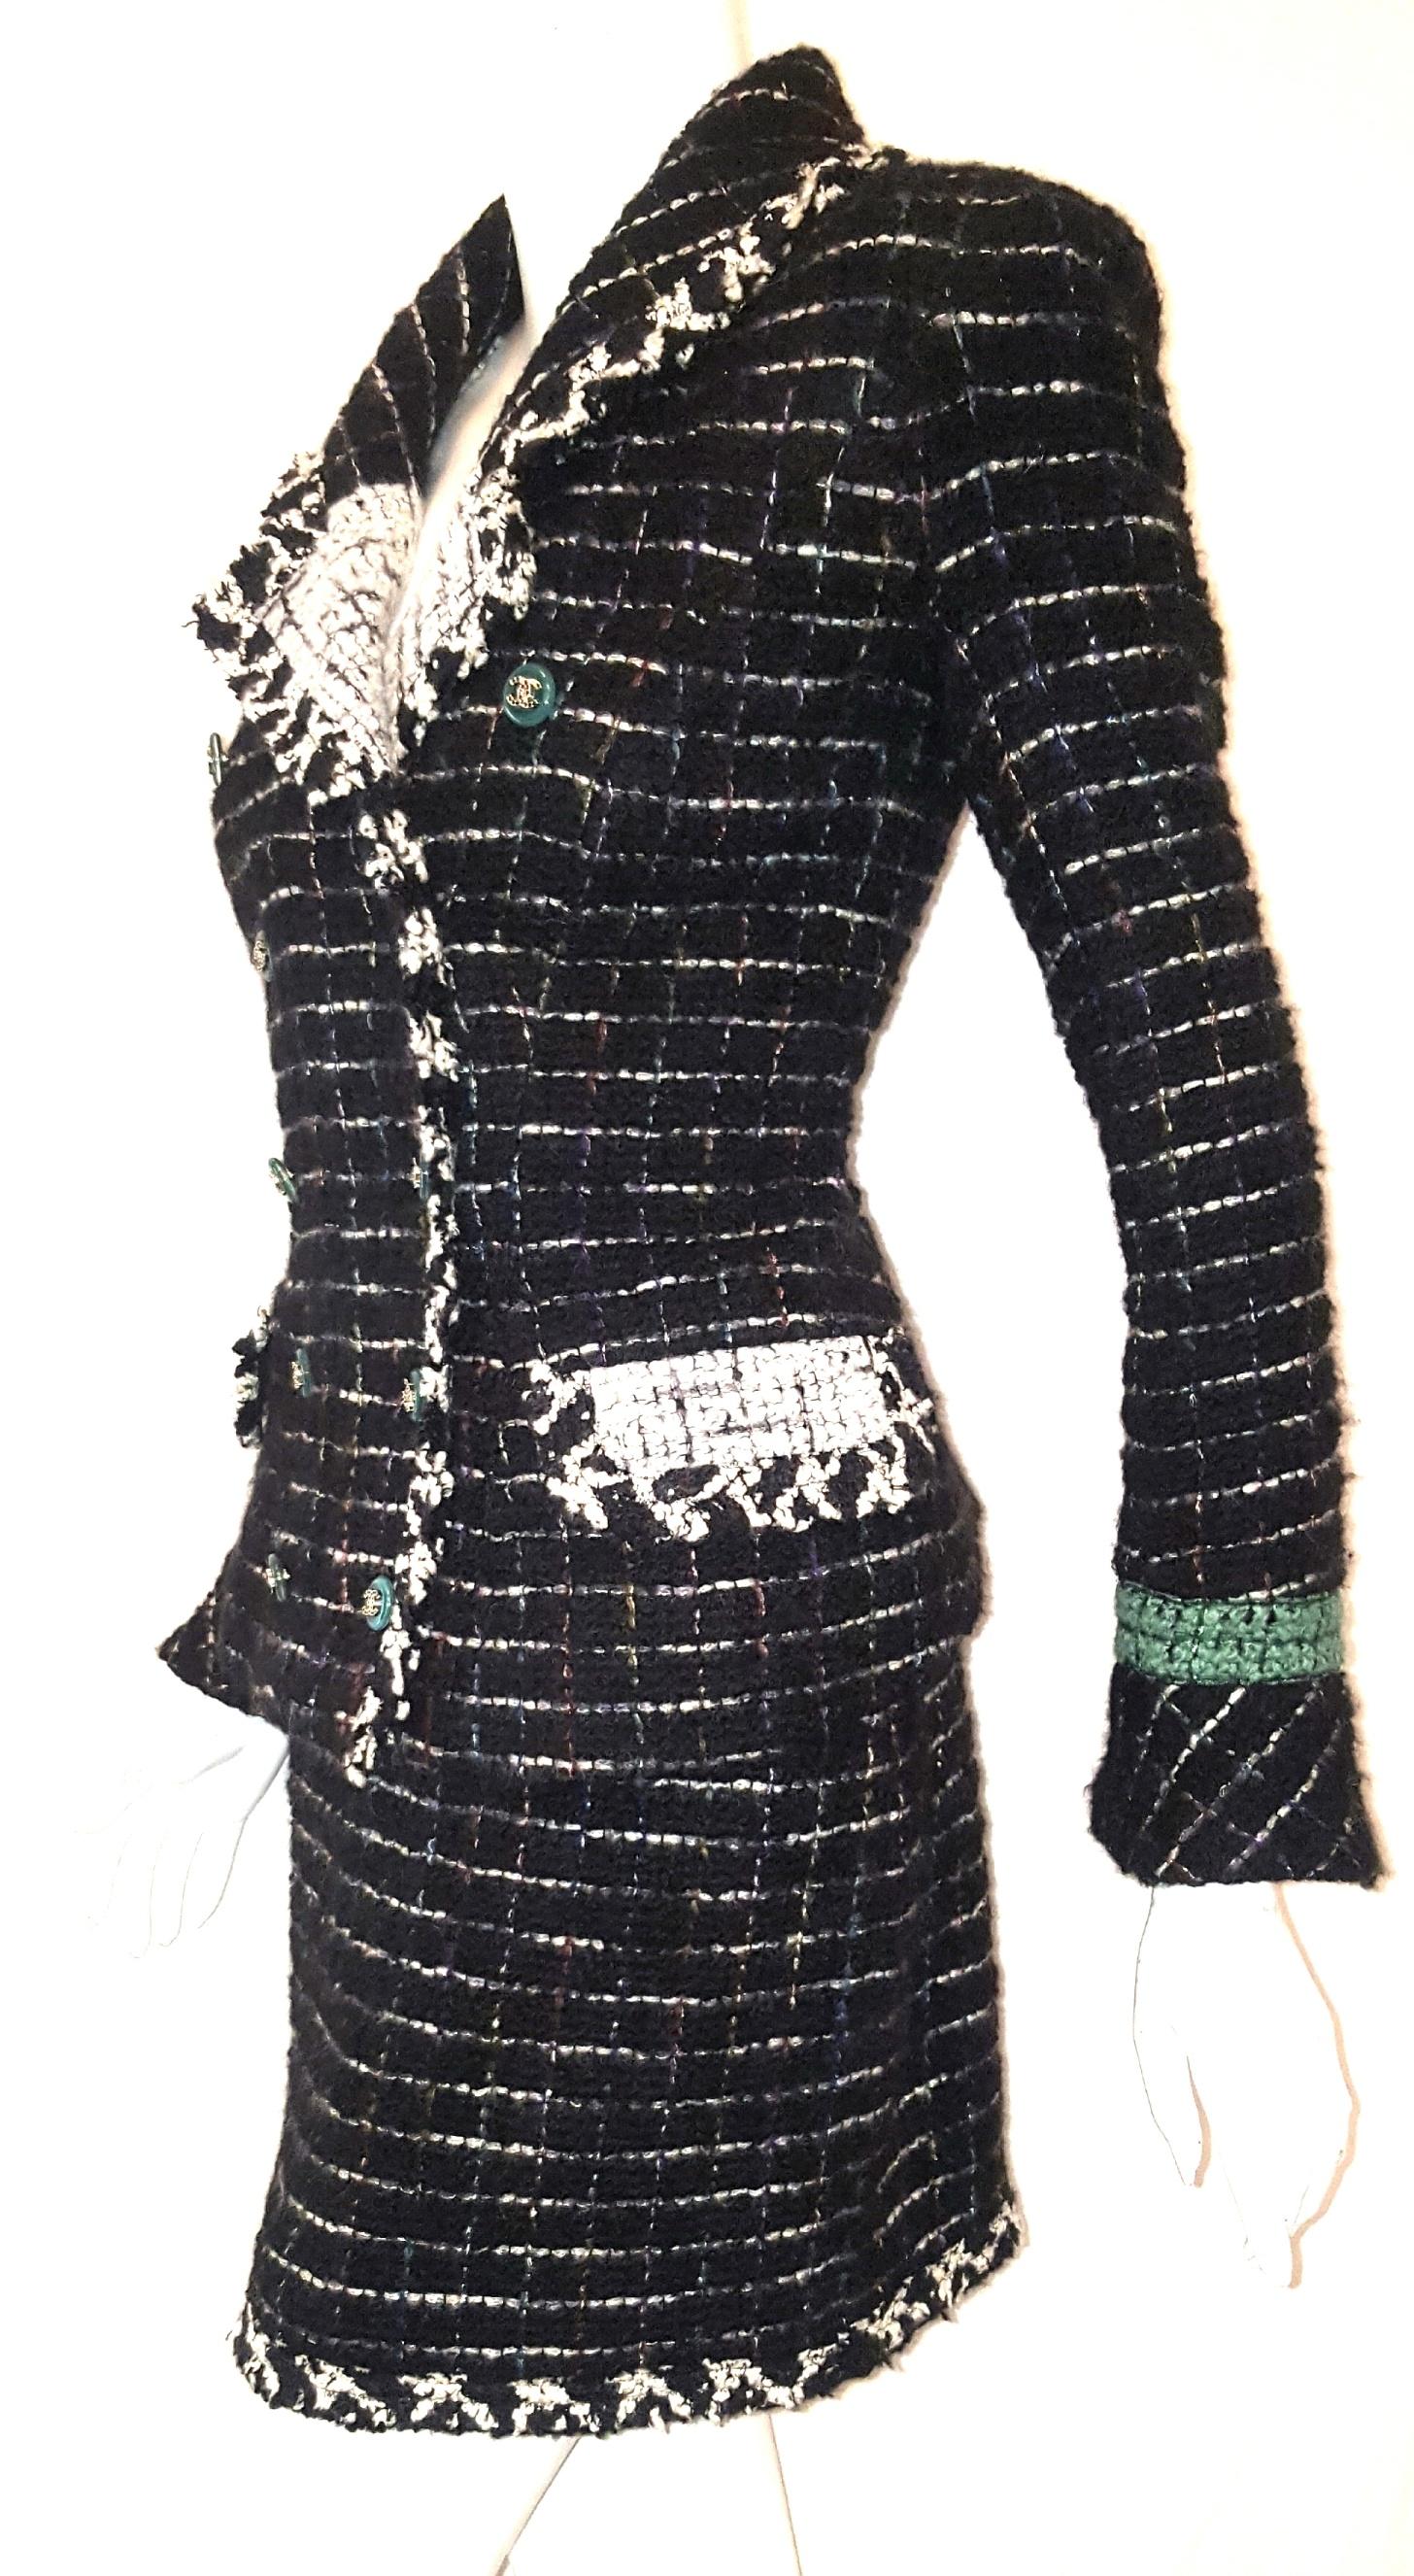 Chanel black and white metallic tweed with multi color threads woven to show grid lines in metallic silver, gold tone and dark green, almost reminds us of mosaic tile work. The detailing is beautiful with touches including a high black tweed collar,